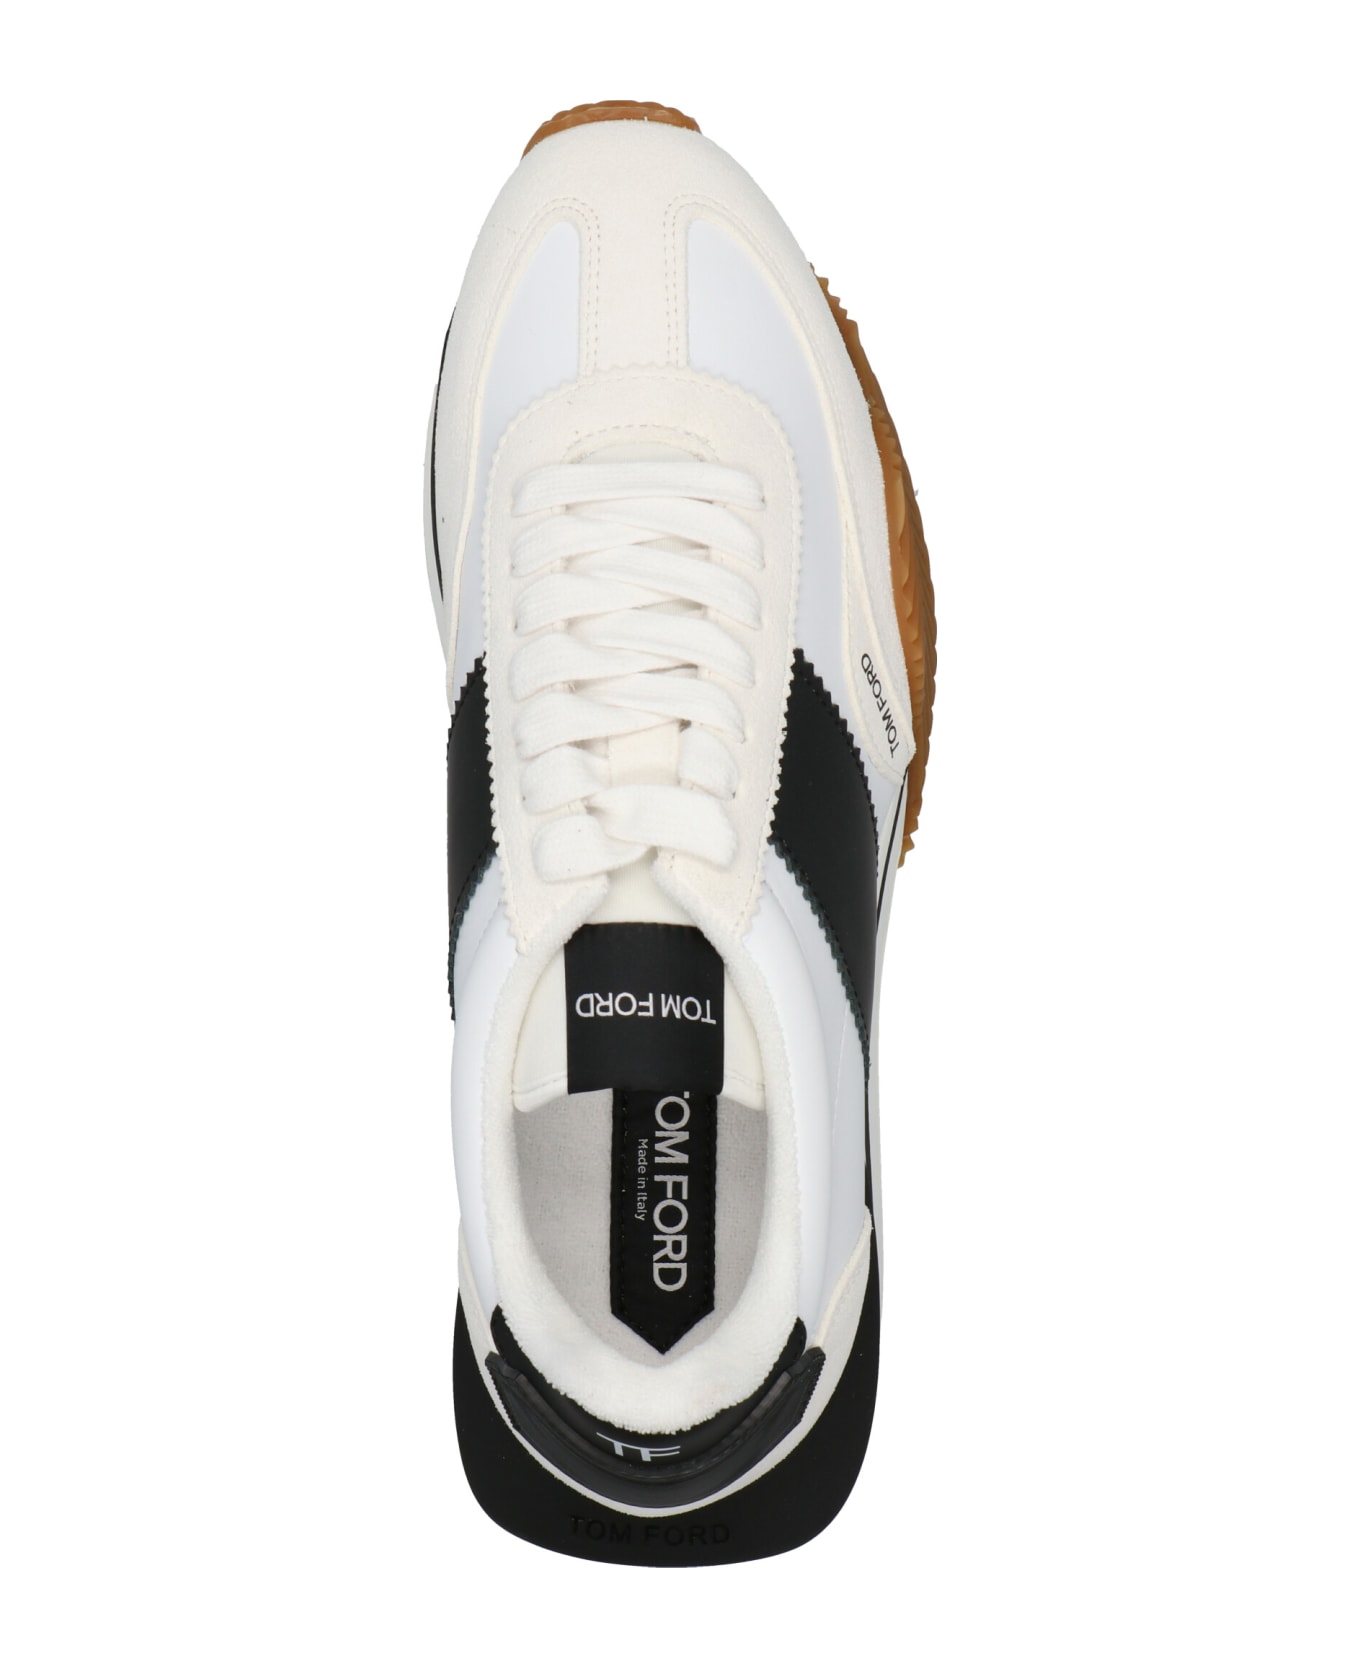 Tom Ford Logo Leather Sneakers - Multicolor